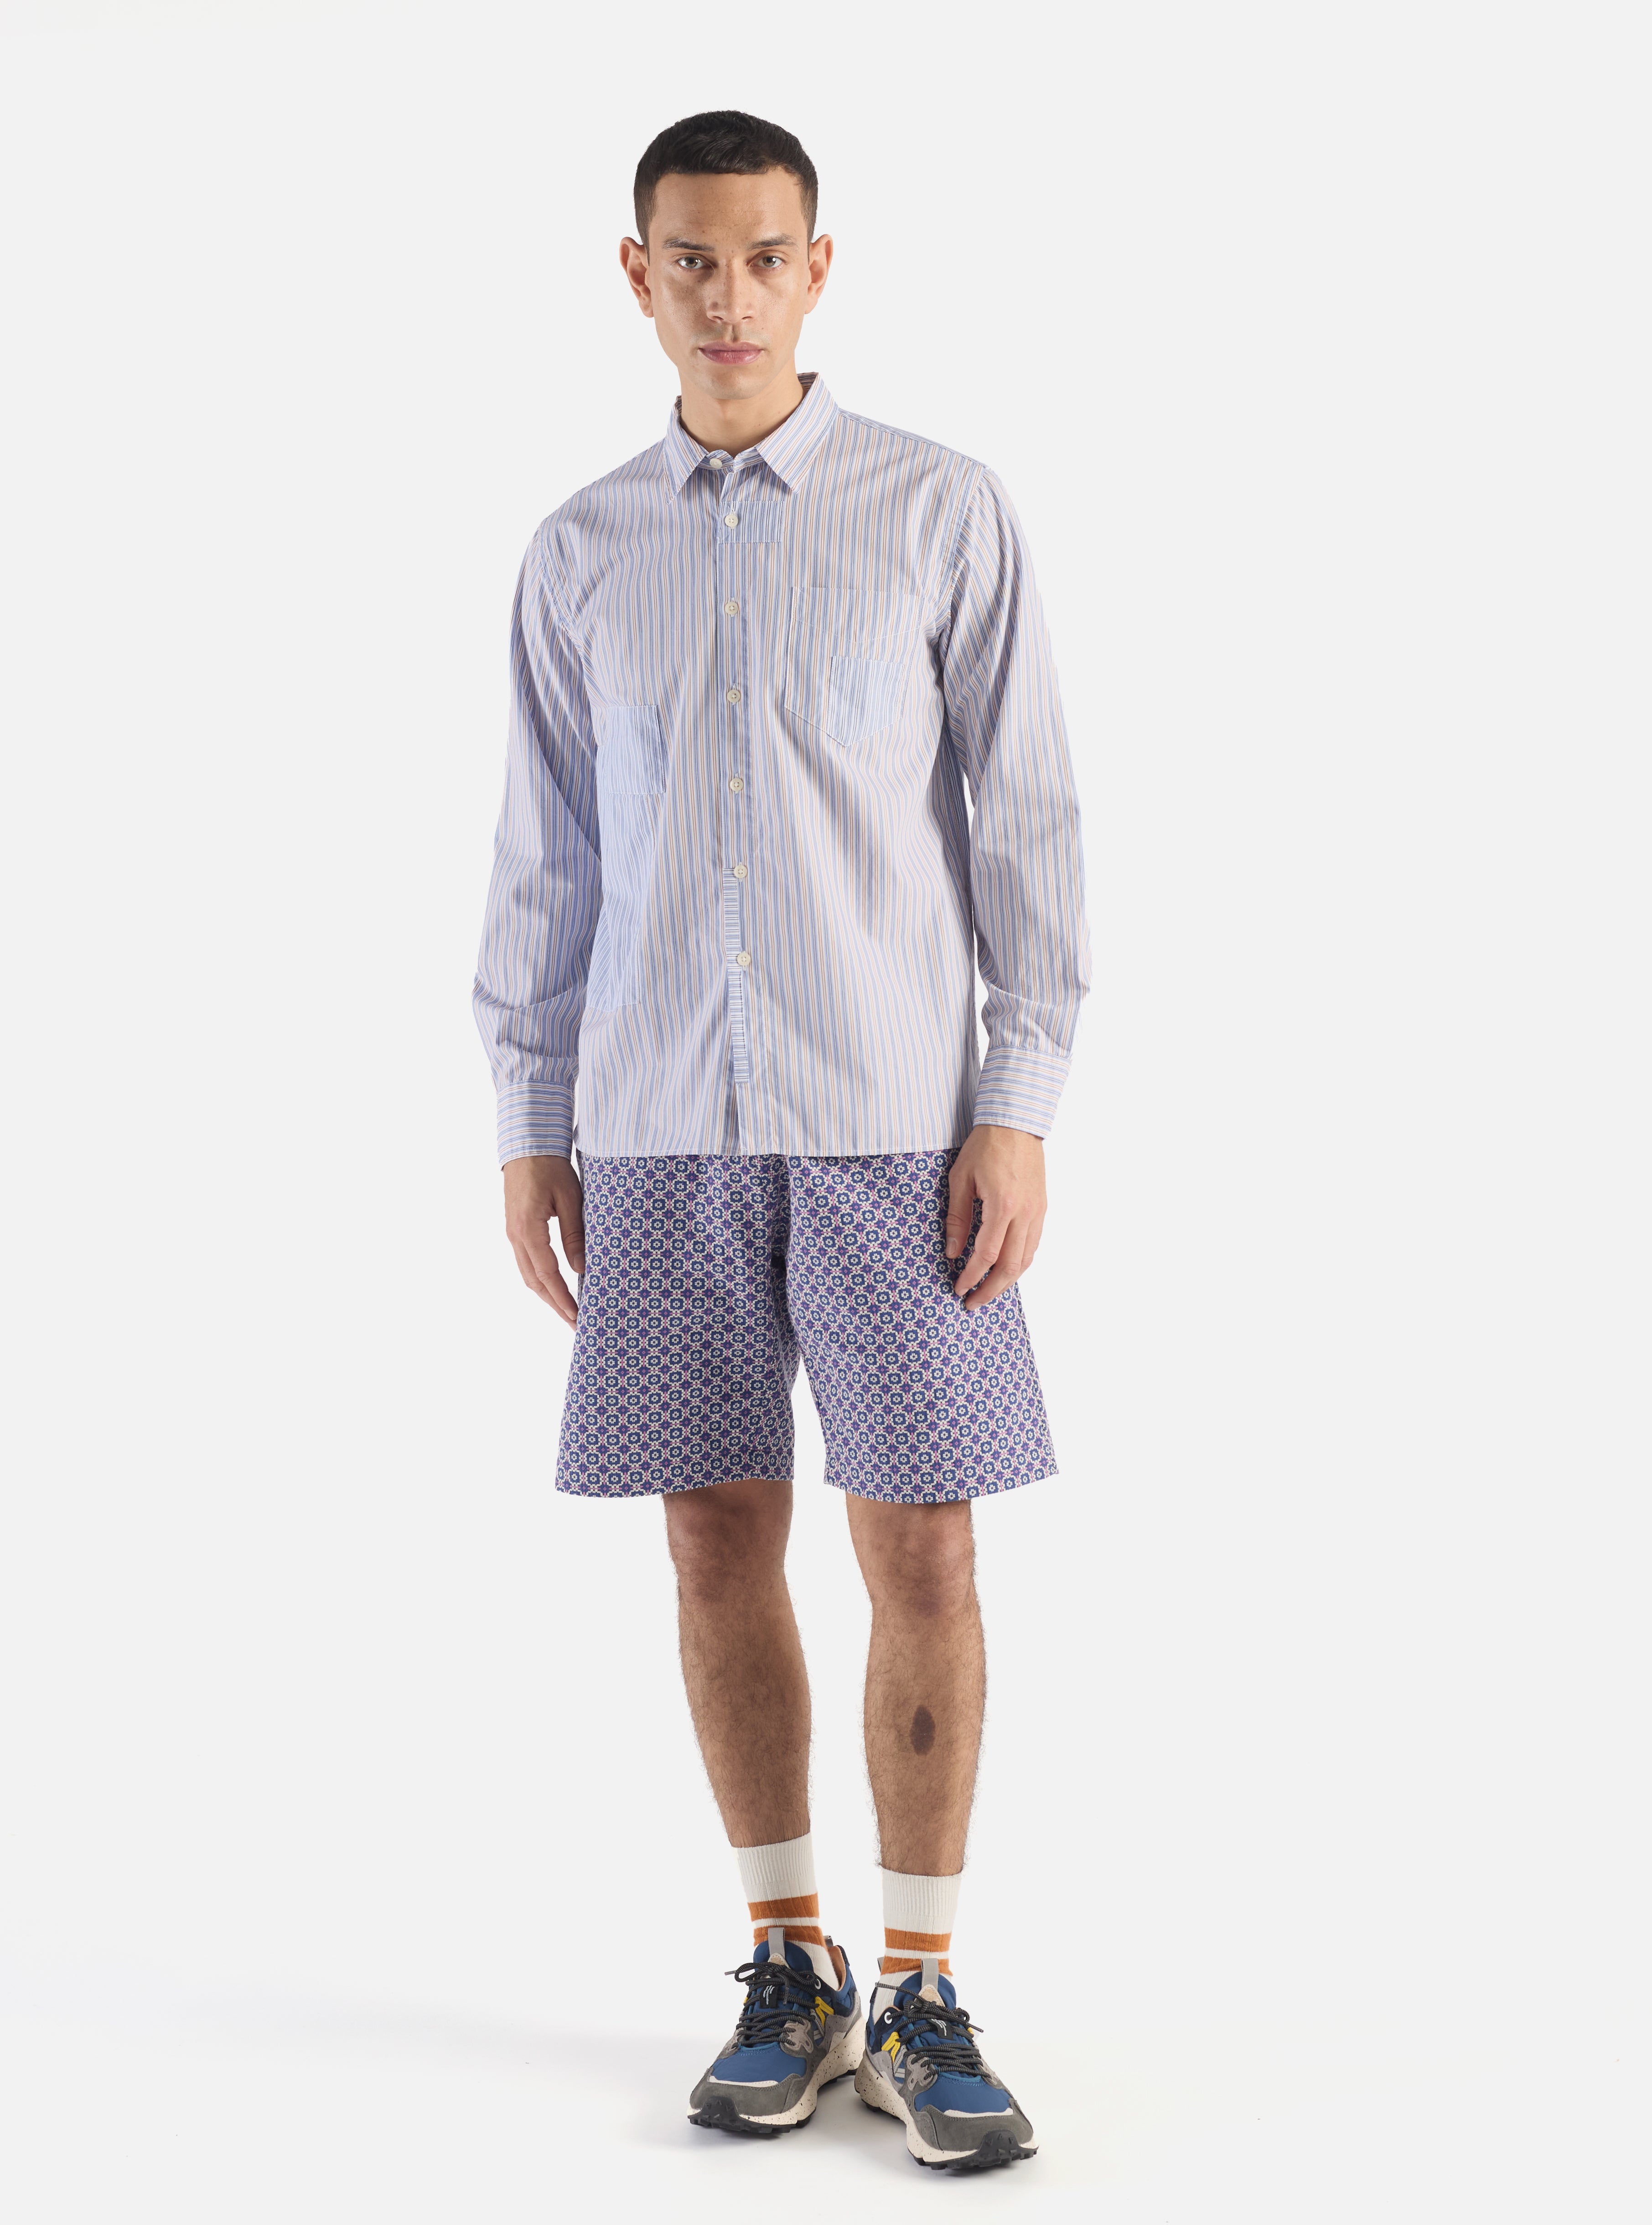 Universal Works Patched Shirt in Blue Busy Stripe Cotton